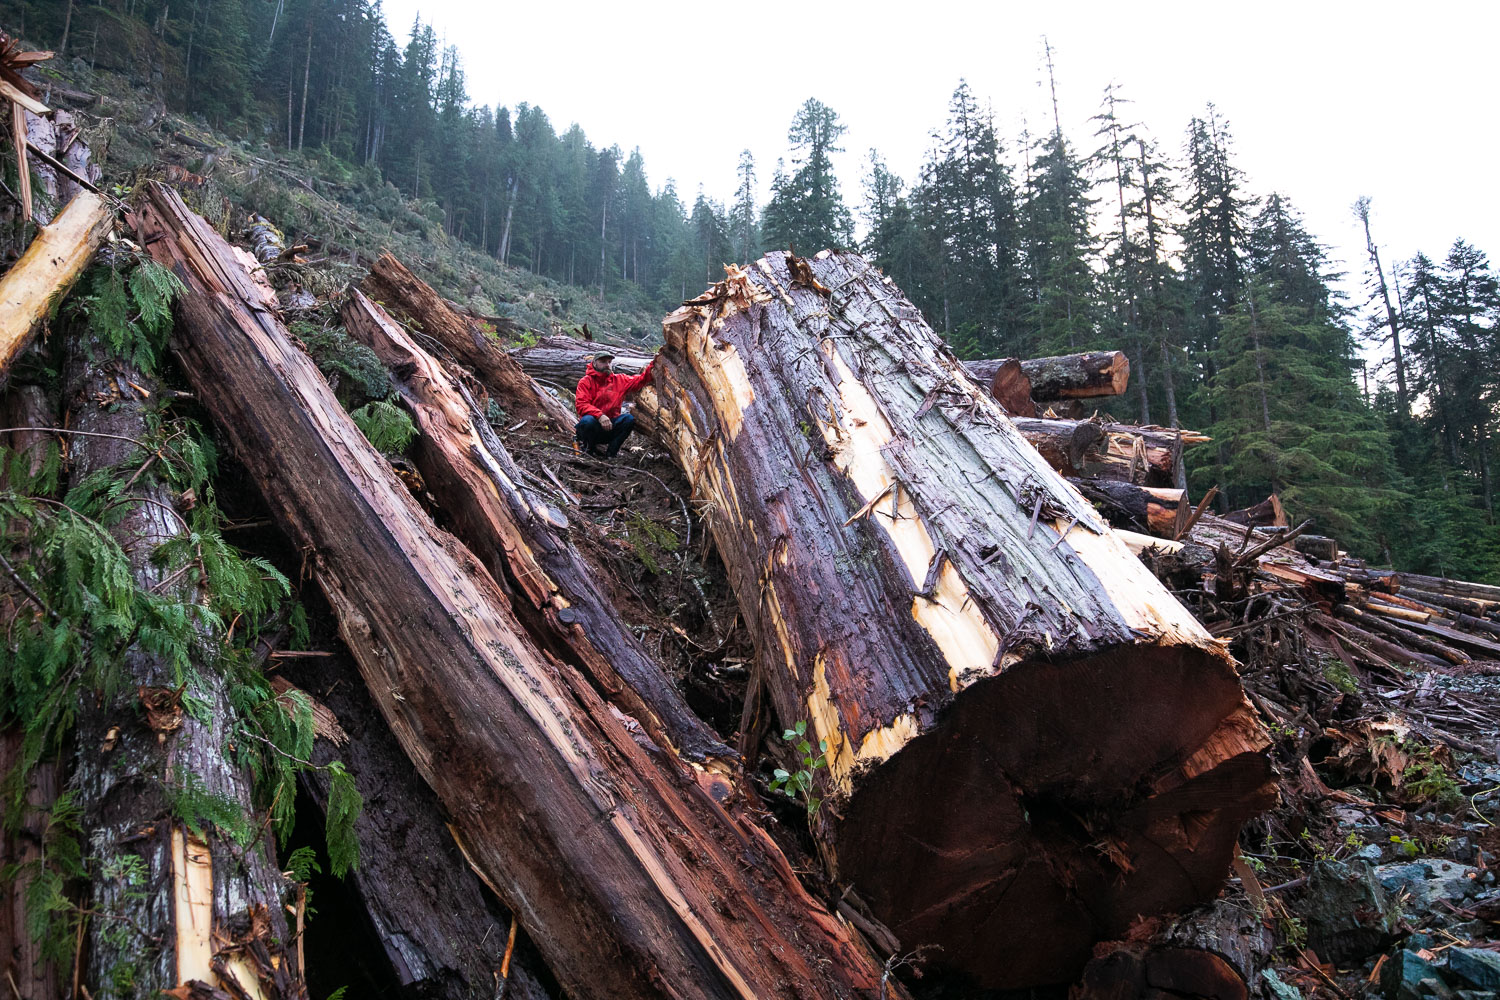 The future of BC’s ancient forests hangs in the balance of decisions made today